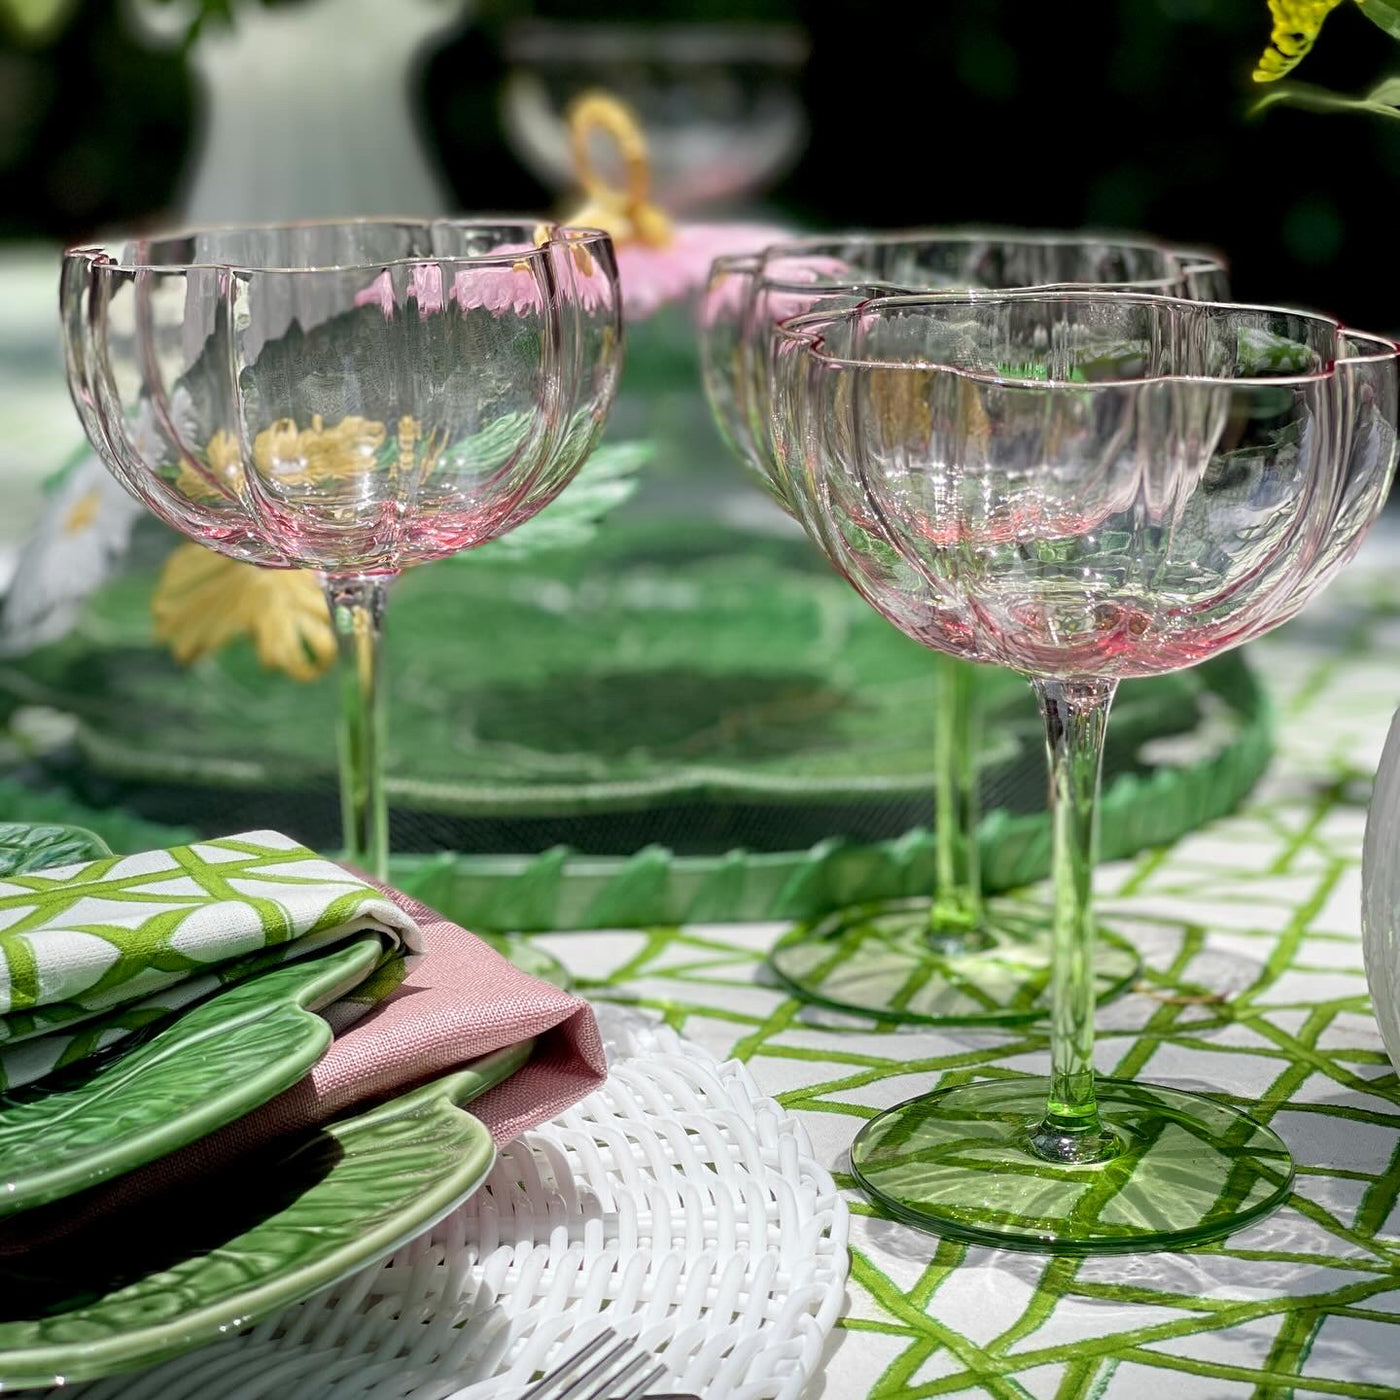 Set of 2 Tulip Coupe Glasses